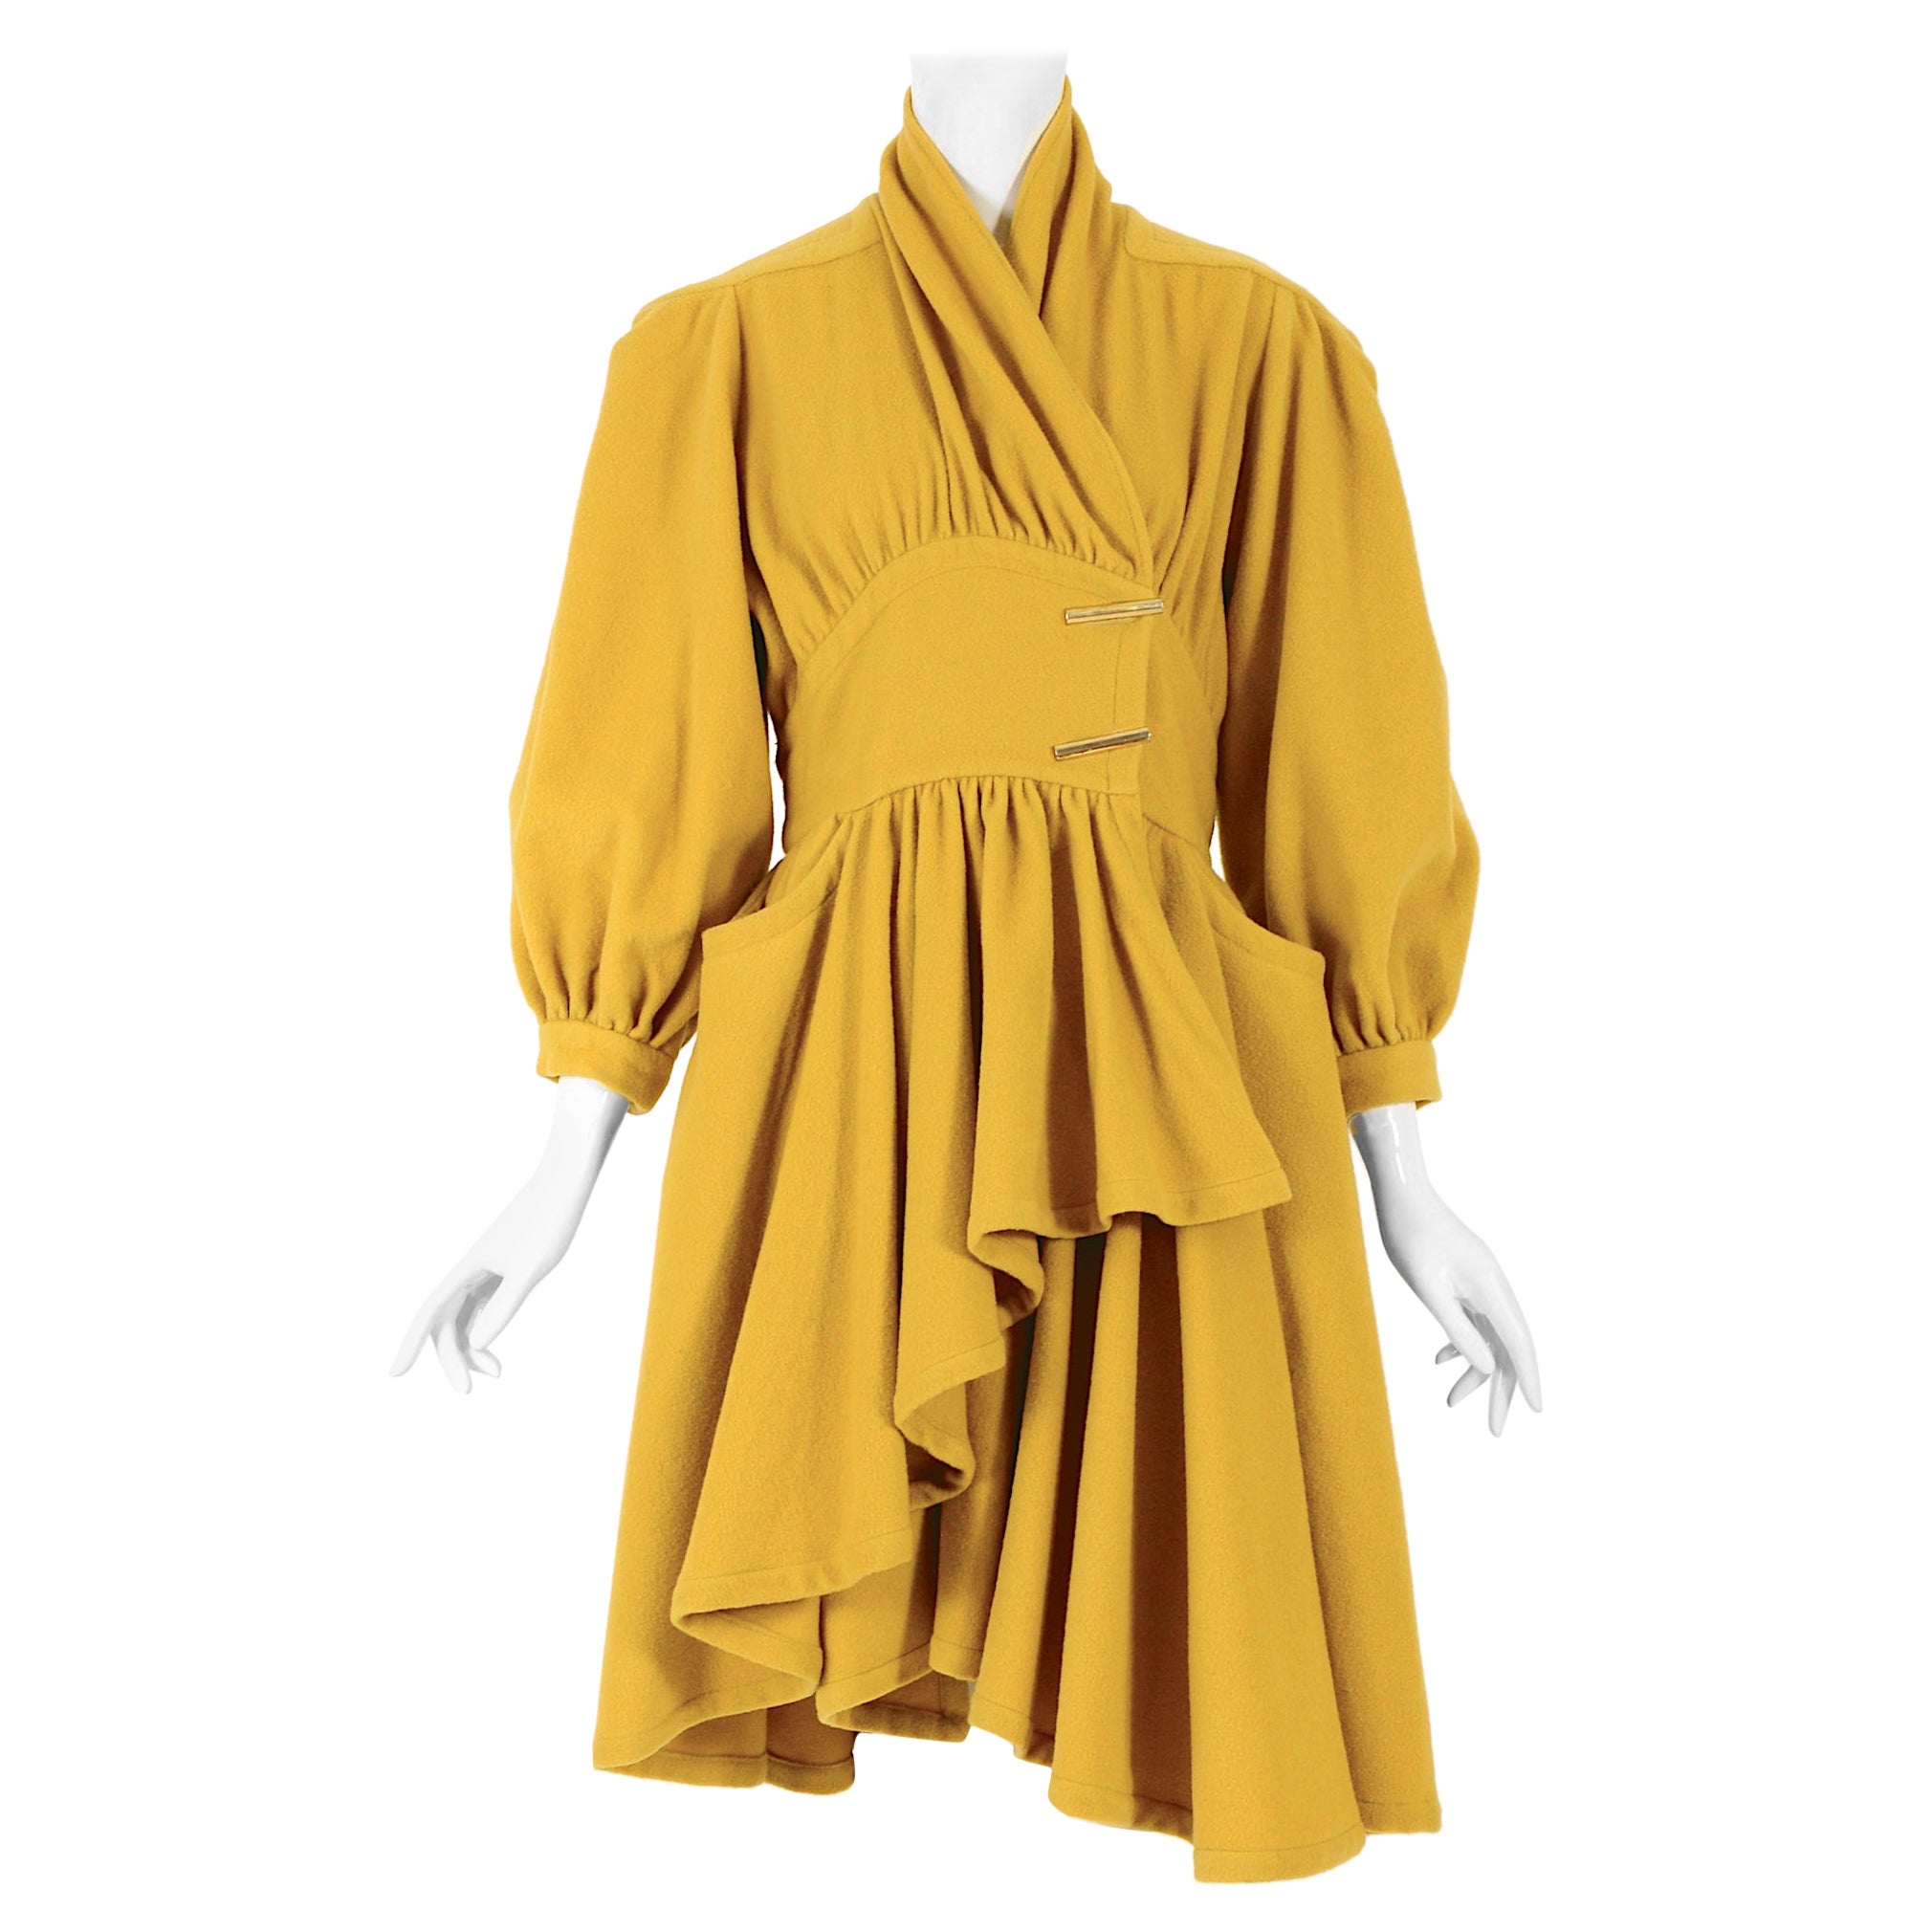 Thierry Mugler F/W 1983 runway collectable mustard yellow wool coat